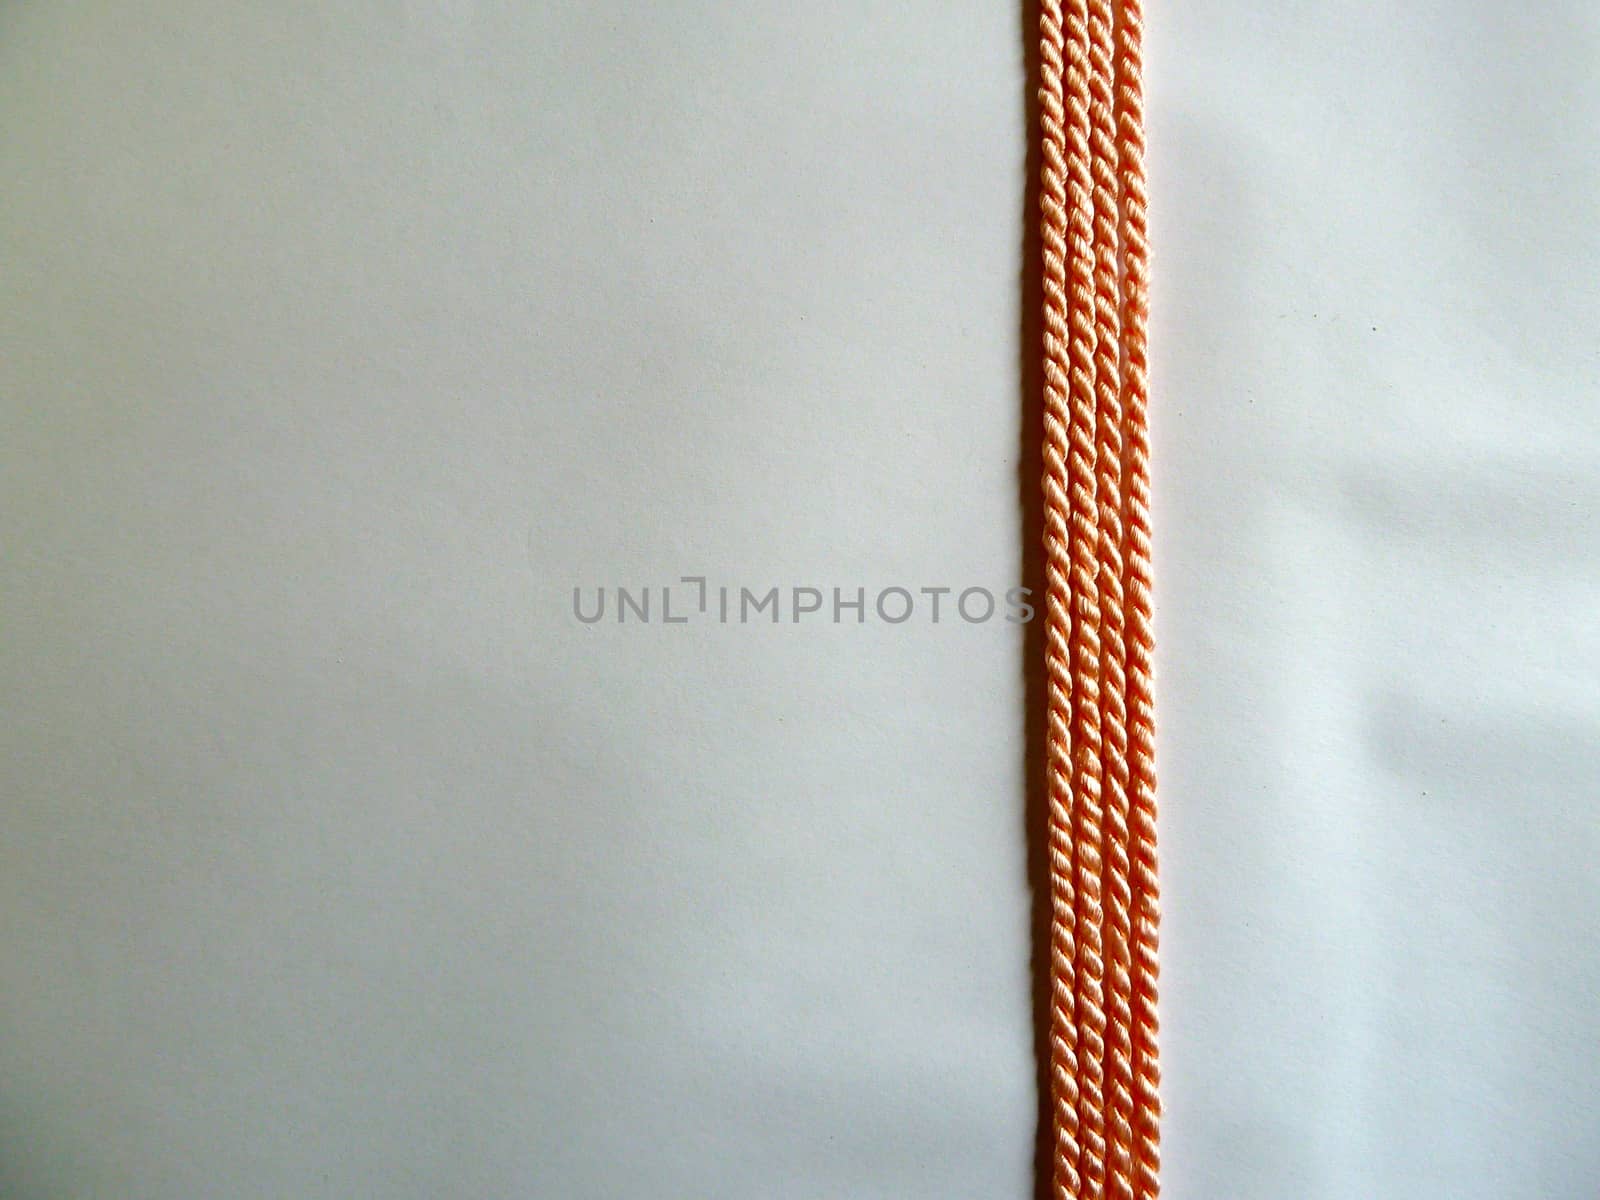 Thin bright orange ropes in a straight line